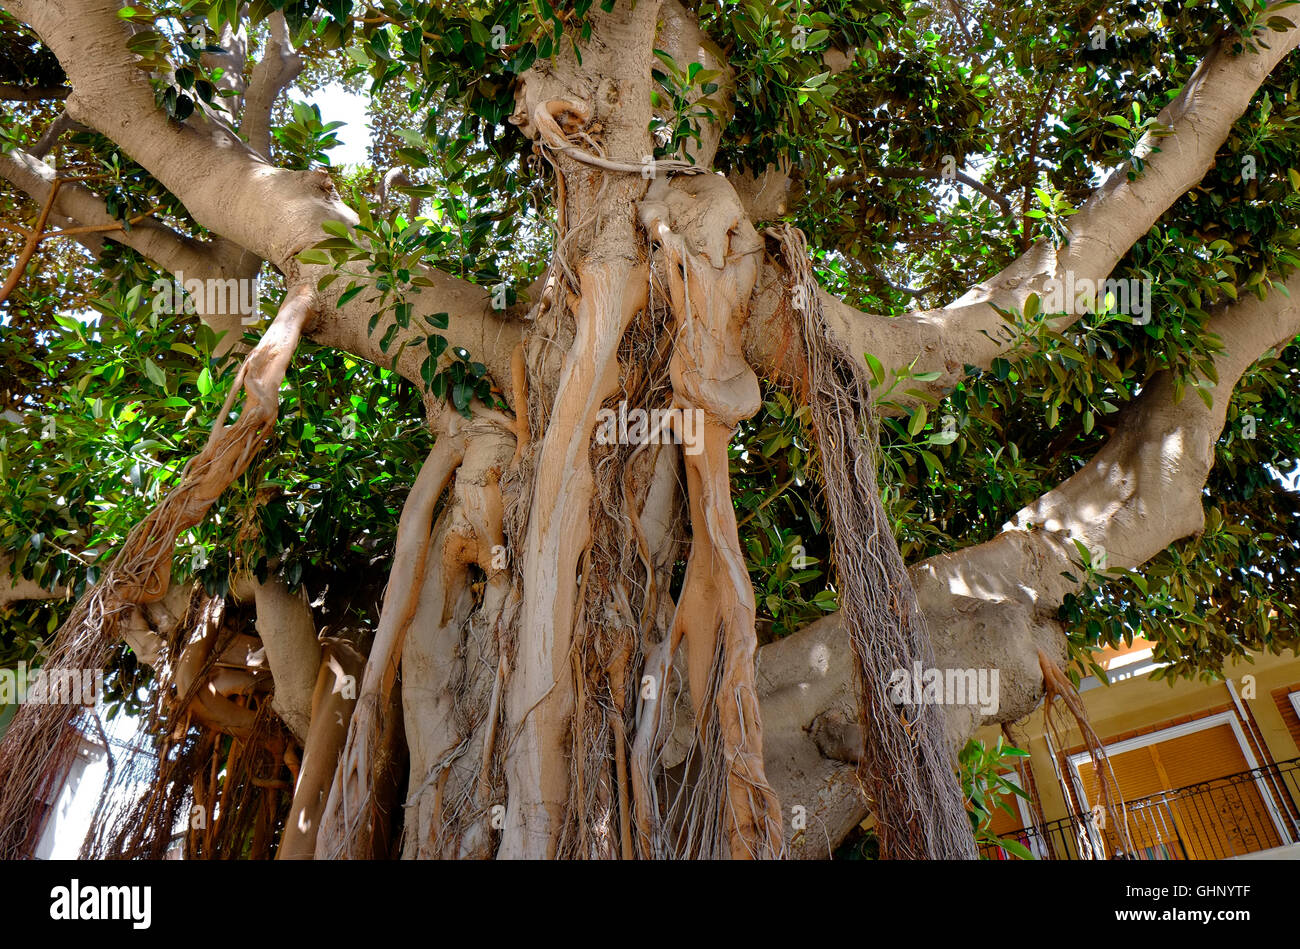 ficus macrophylla tree standing in aguilas, spain Stock Photo